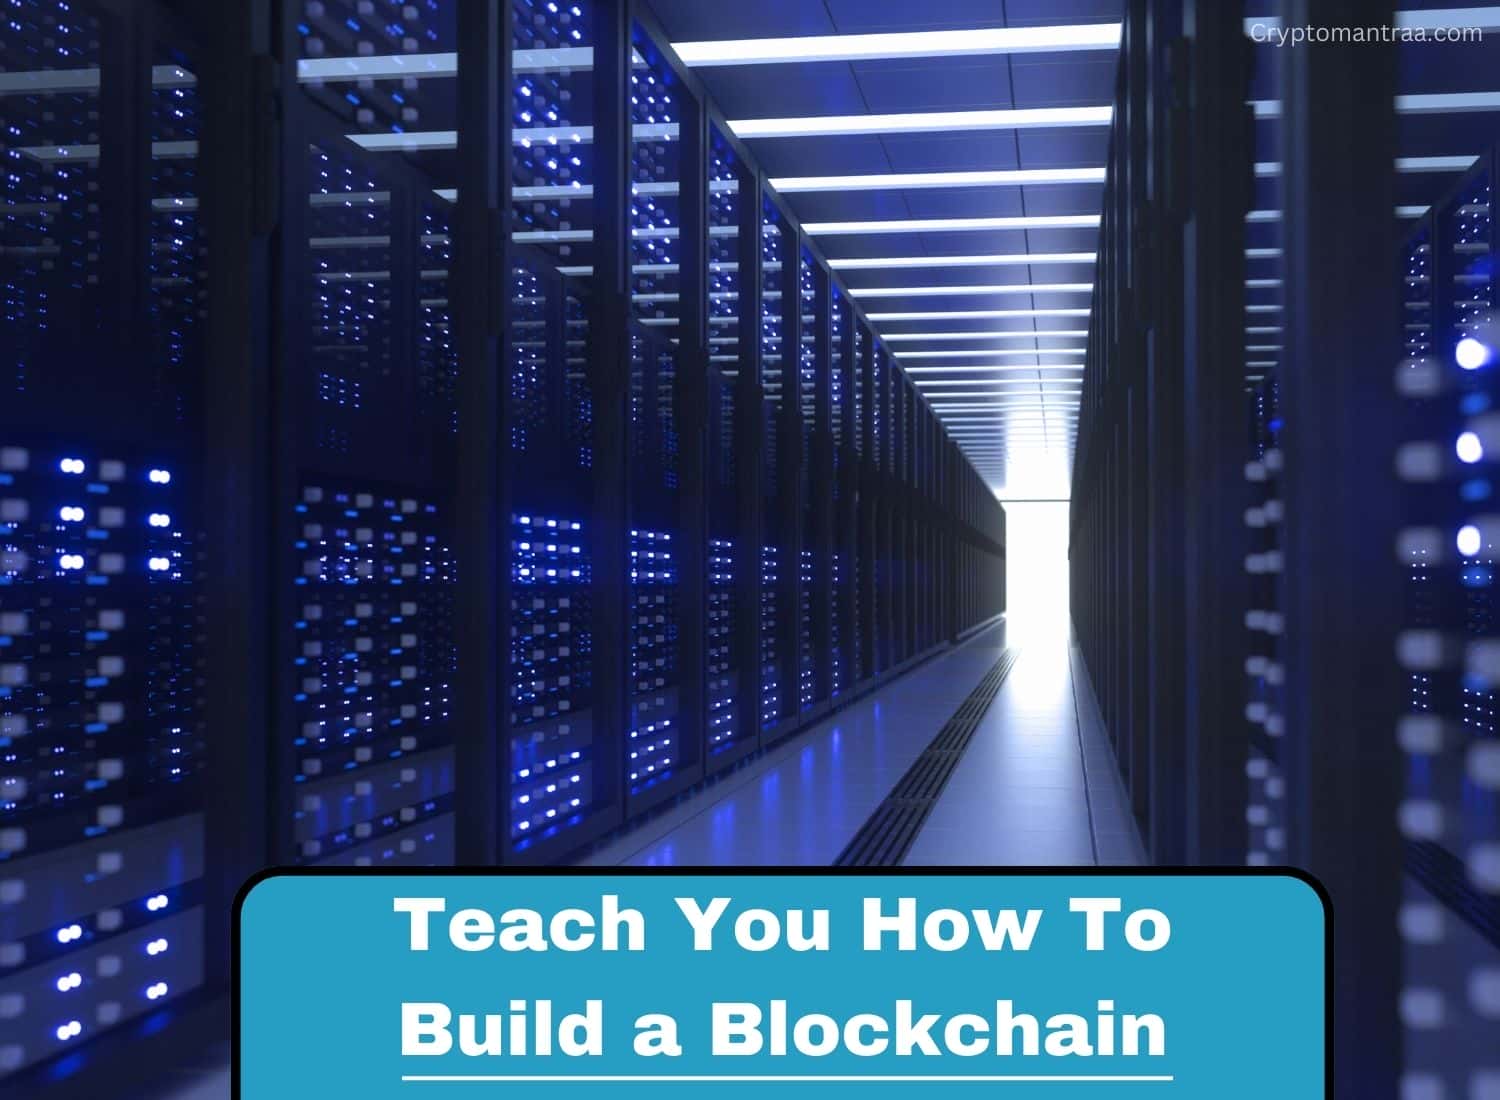 Learn How To Build A Blockchain | Step-by-Step Guide